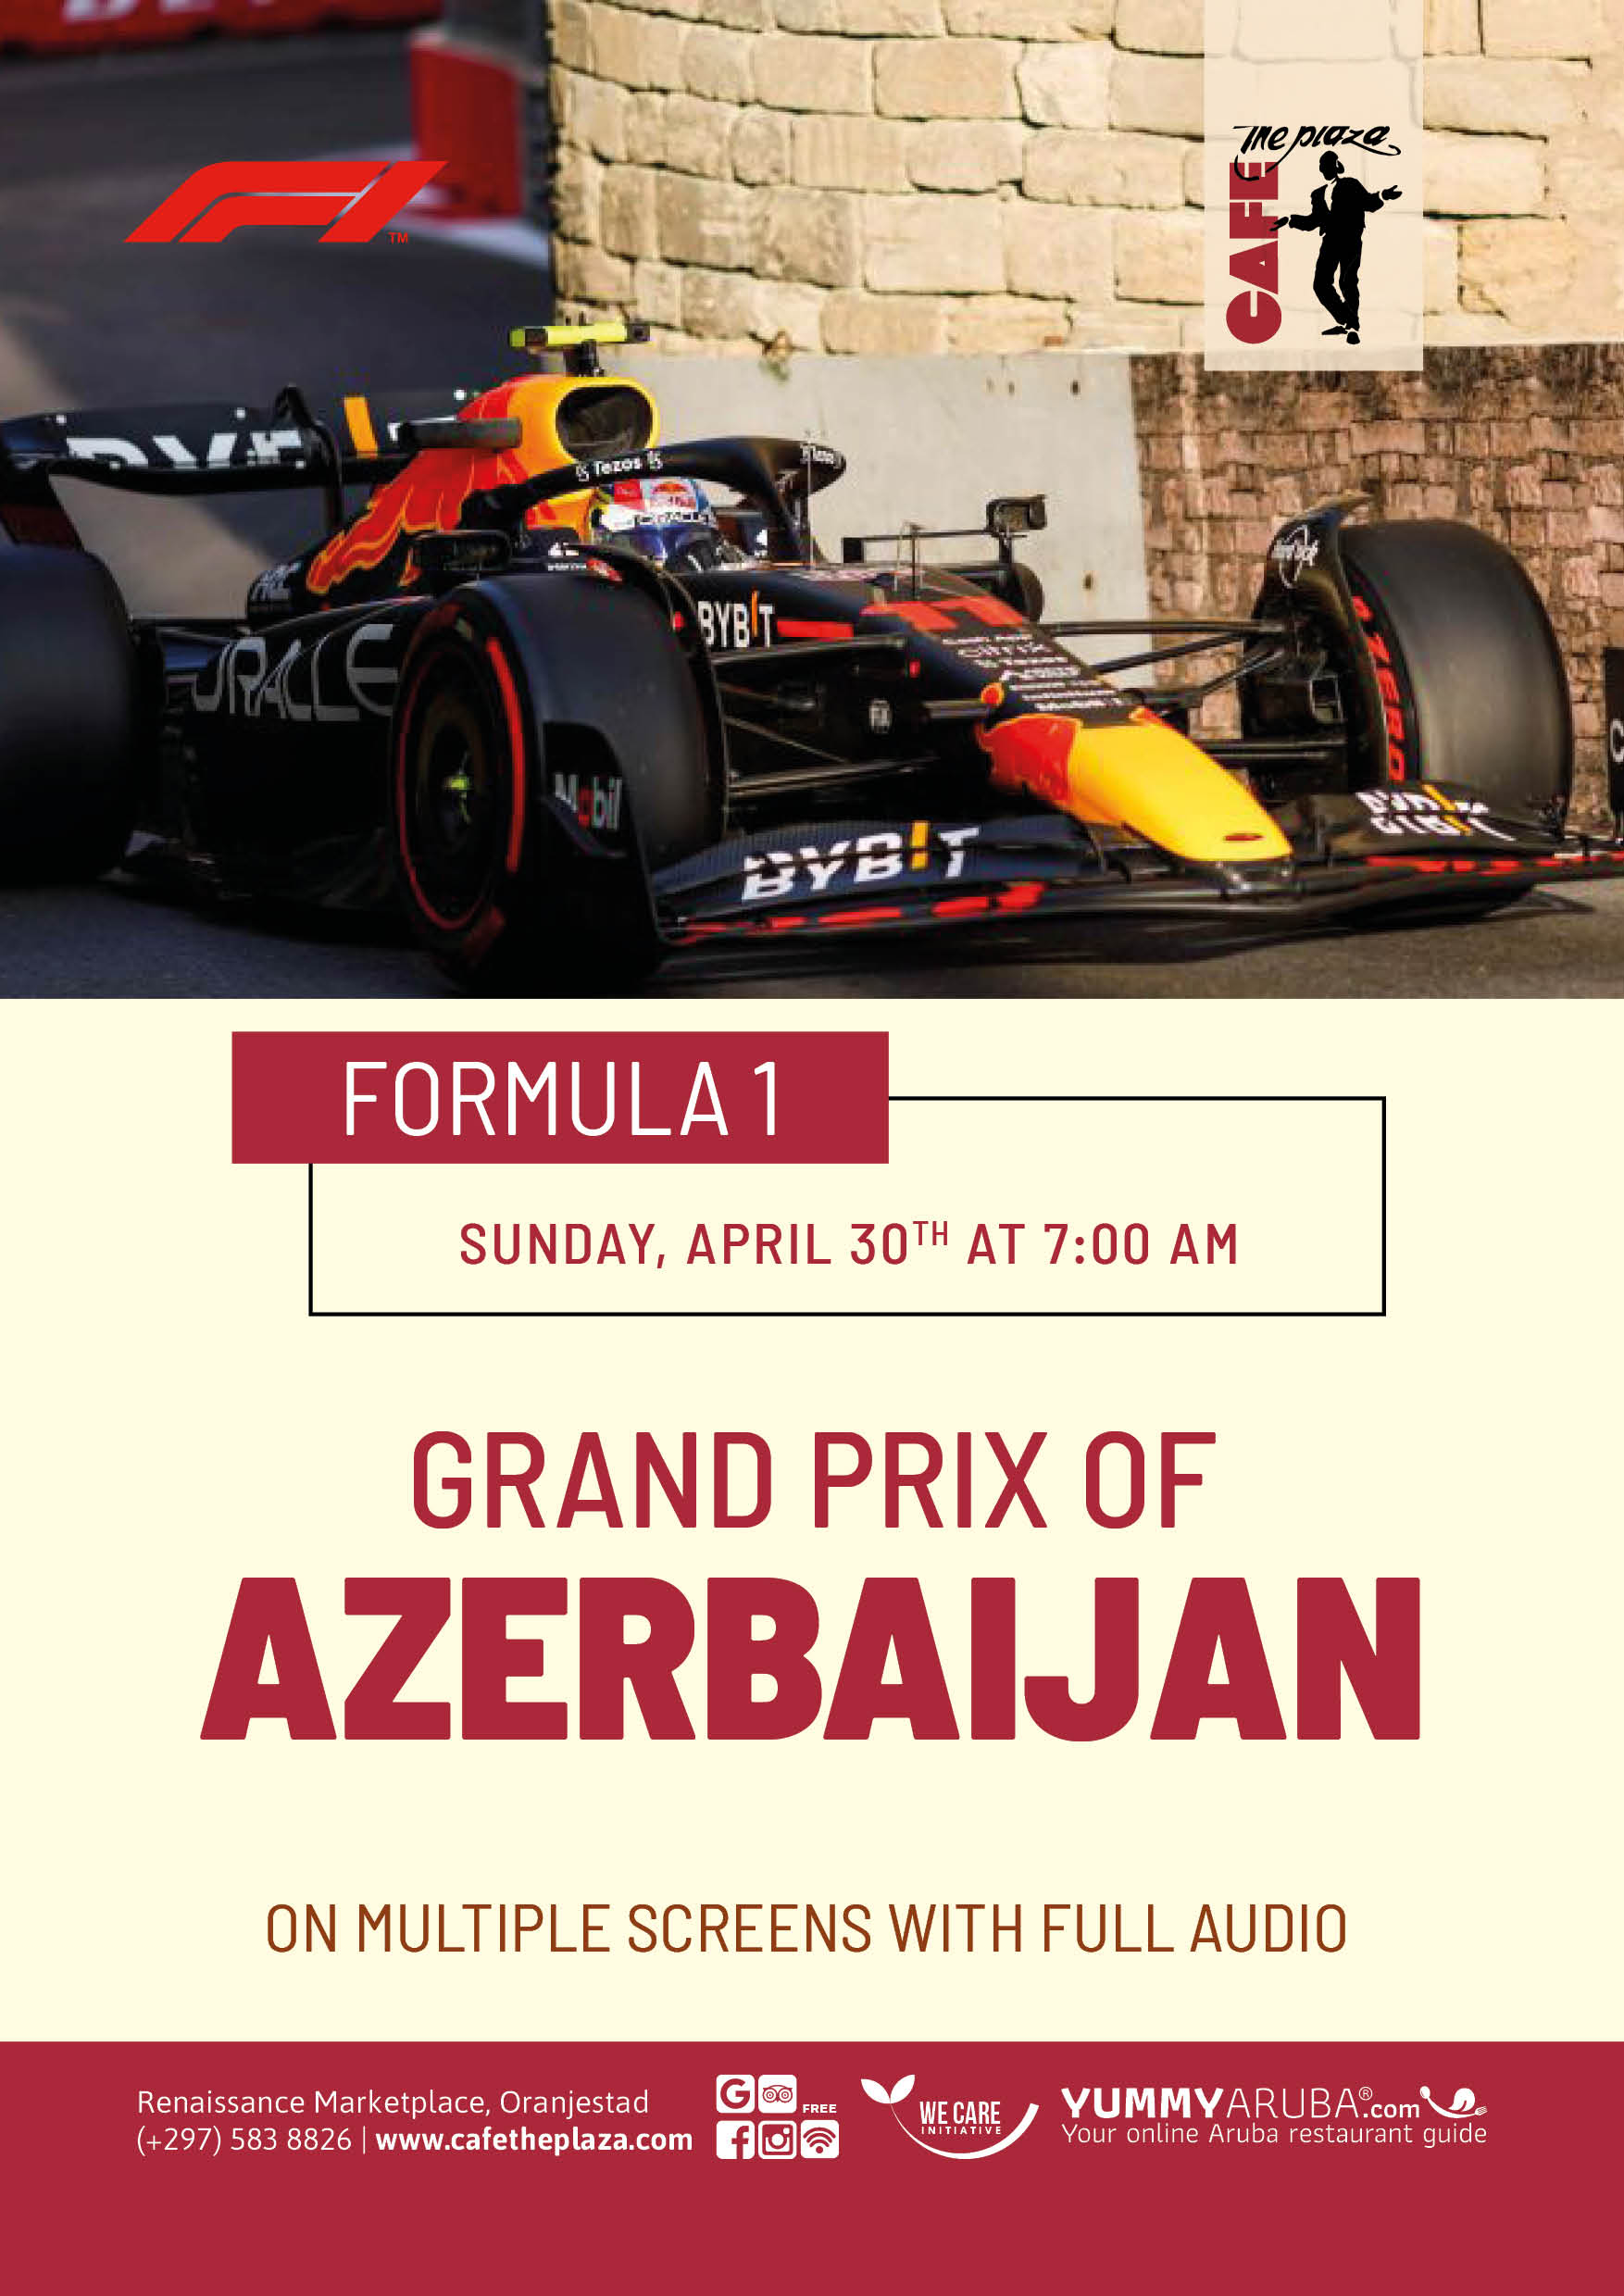 Start Your Engines with Delicious Breakfast and Live Coverage of the Azerbaijan Grand Prix